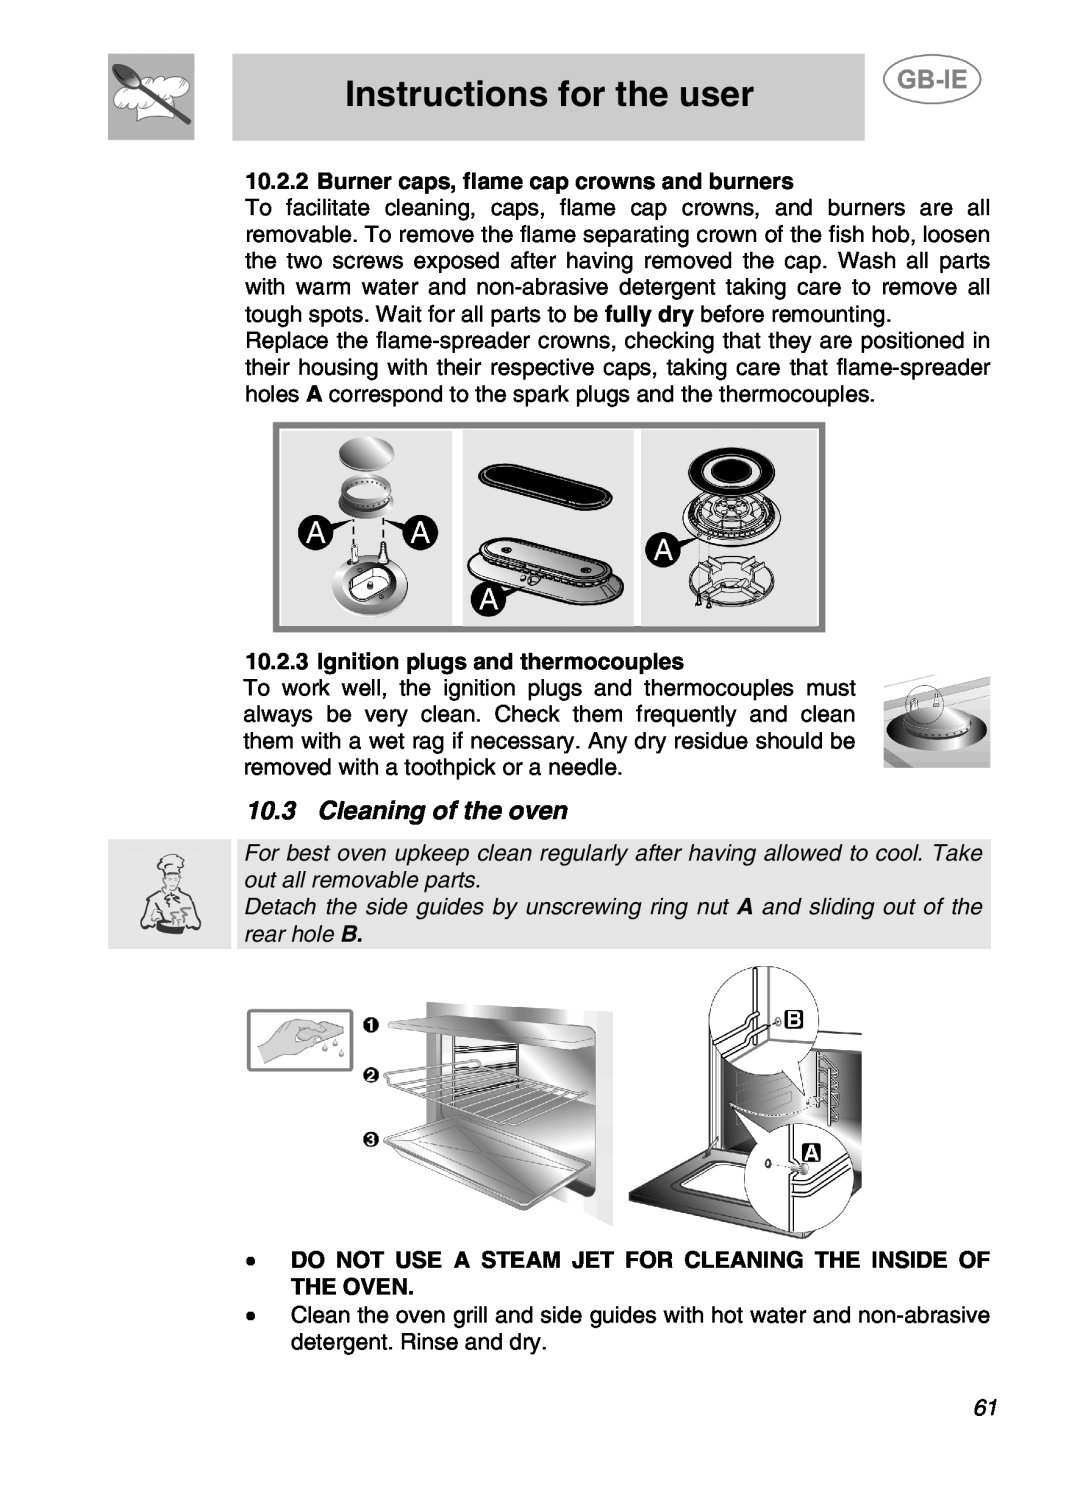 Smeg A2-5, A2-2 manual Cleaning of the oven, Instructions for the user, Burner caps, flame cap crowns and burners 